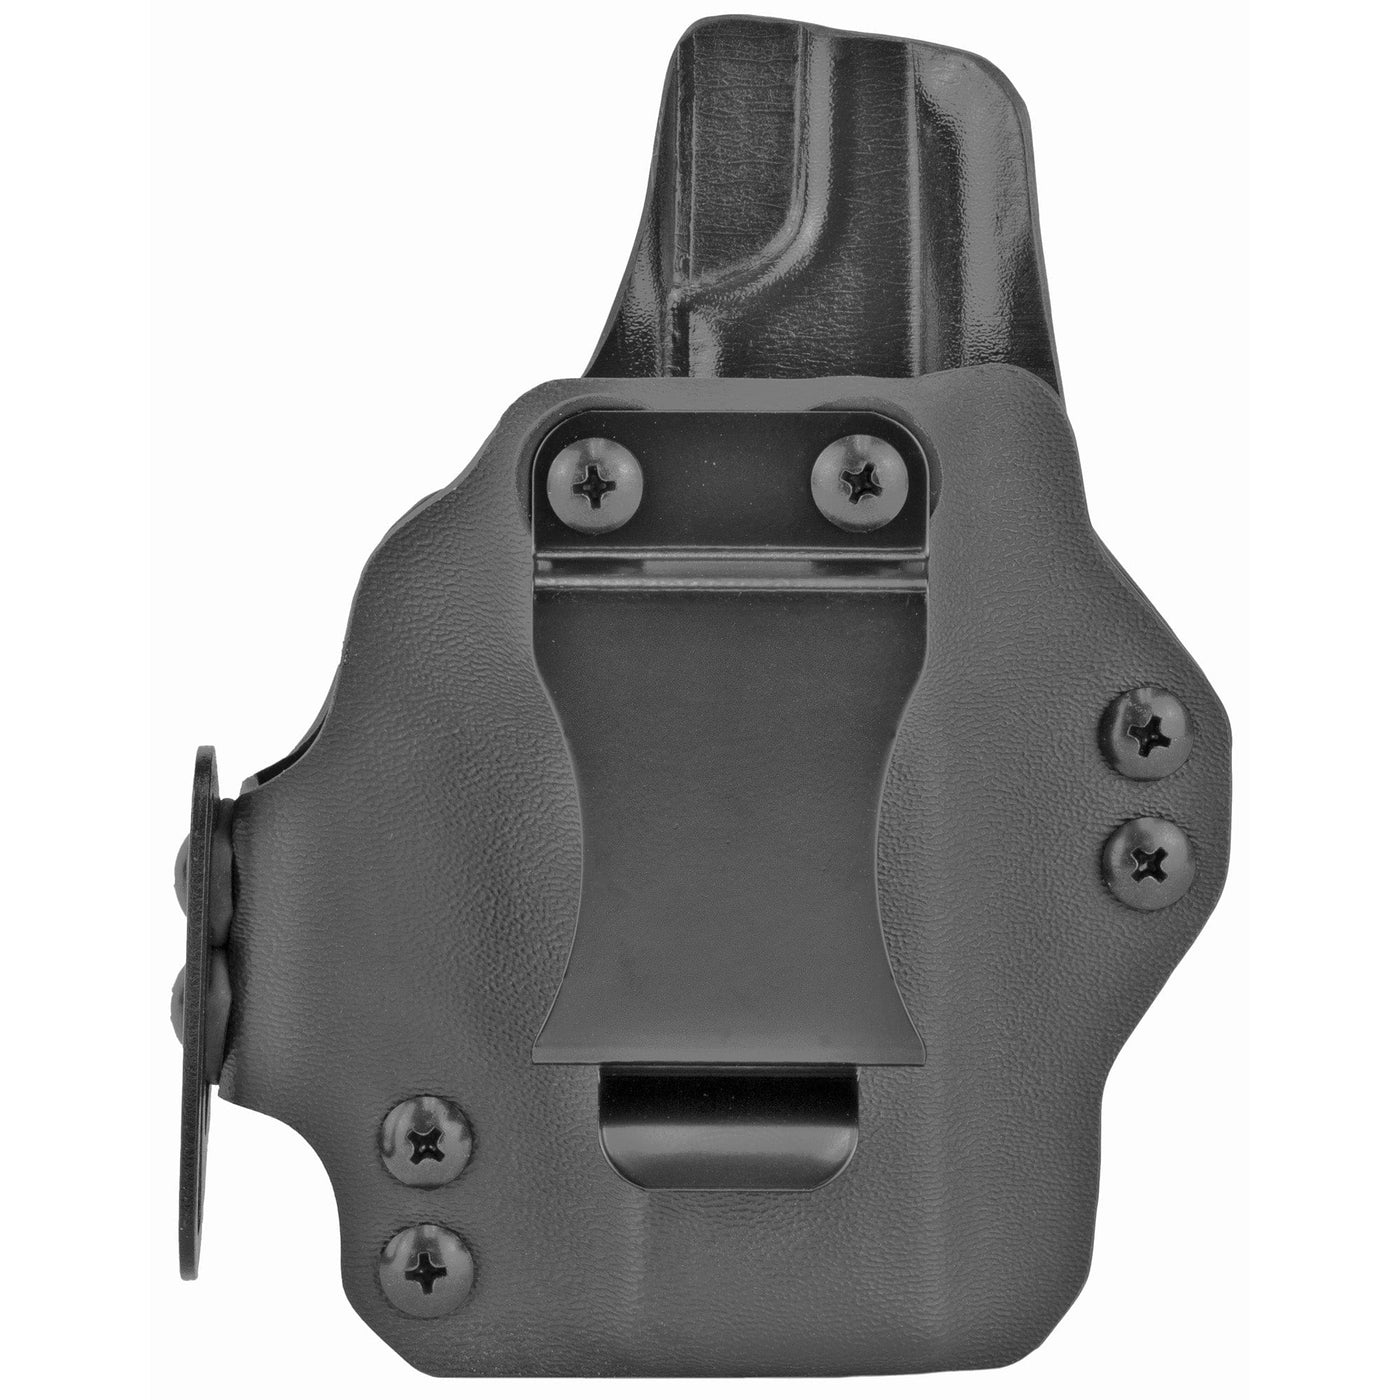 BlackPoint Tactical Blk Pnt Dual Point Aiwb P365 Holsters